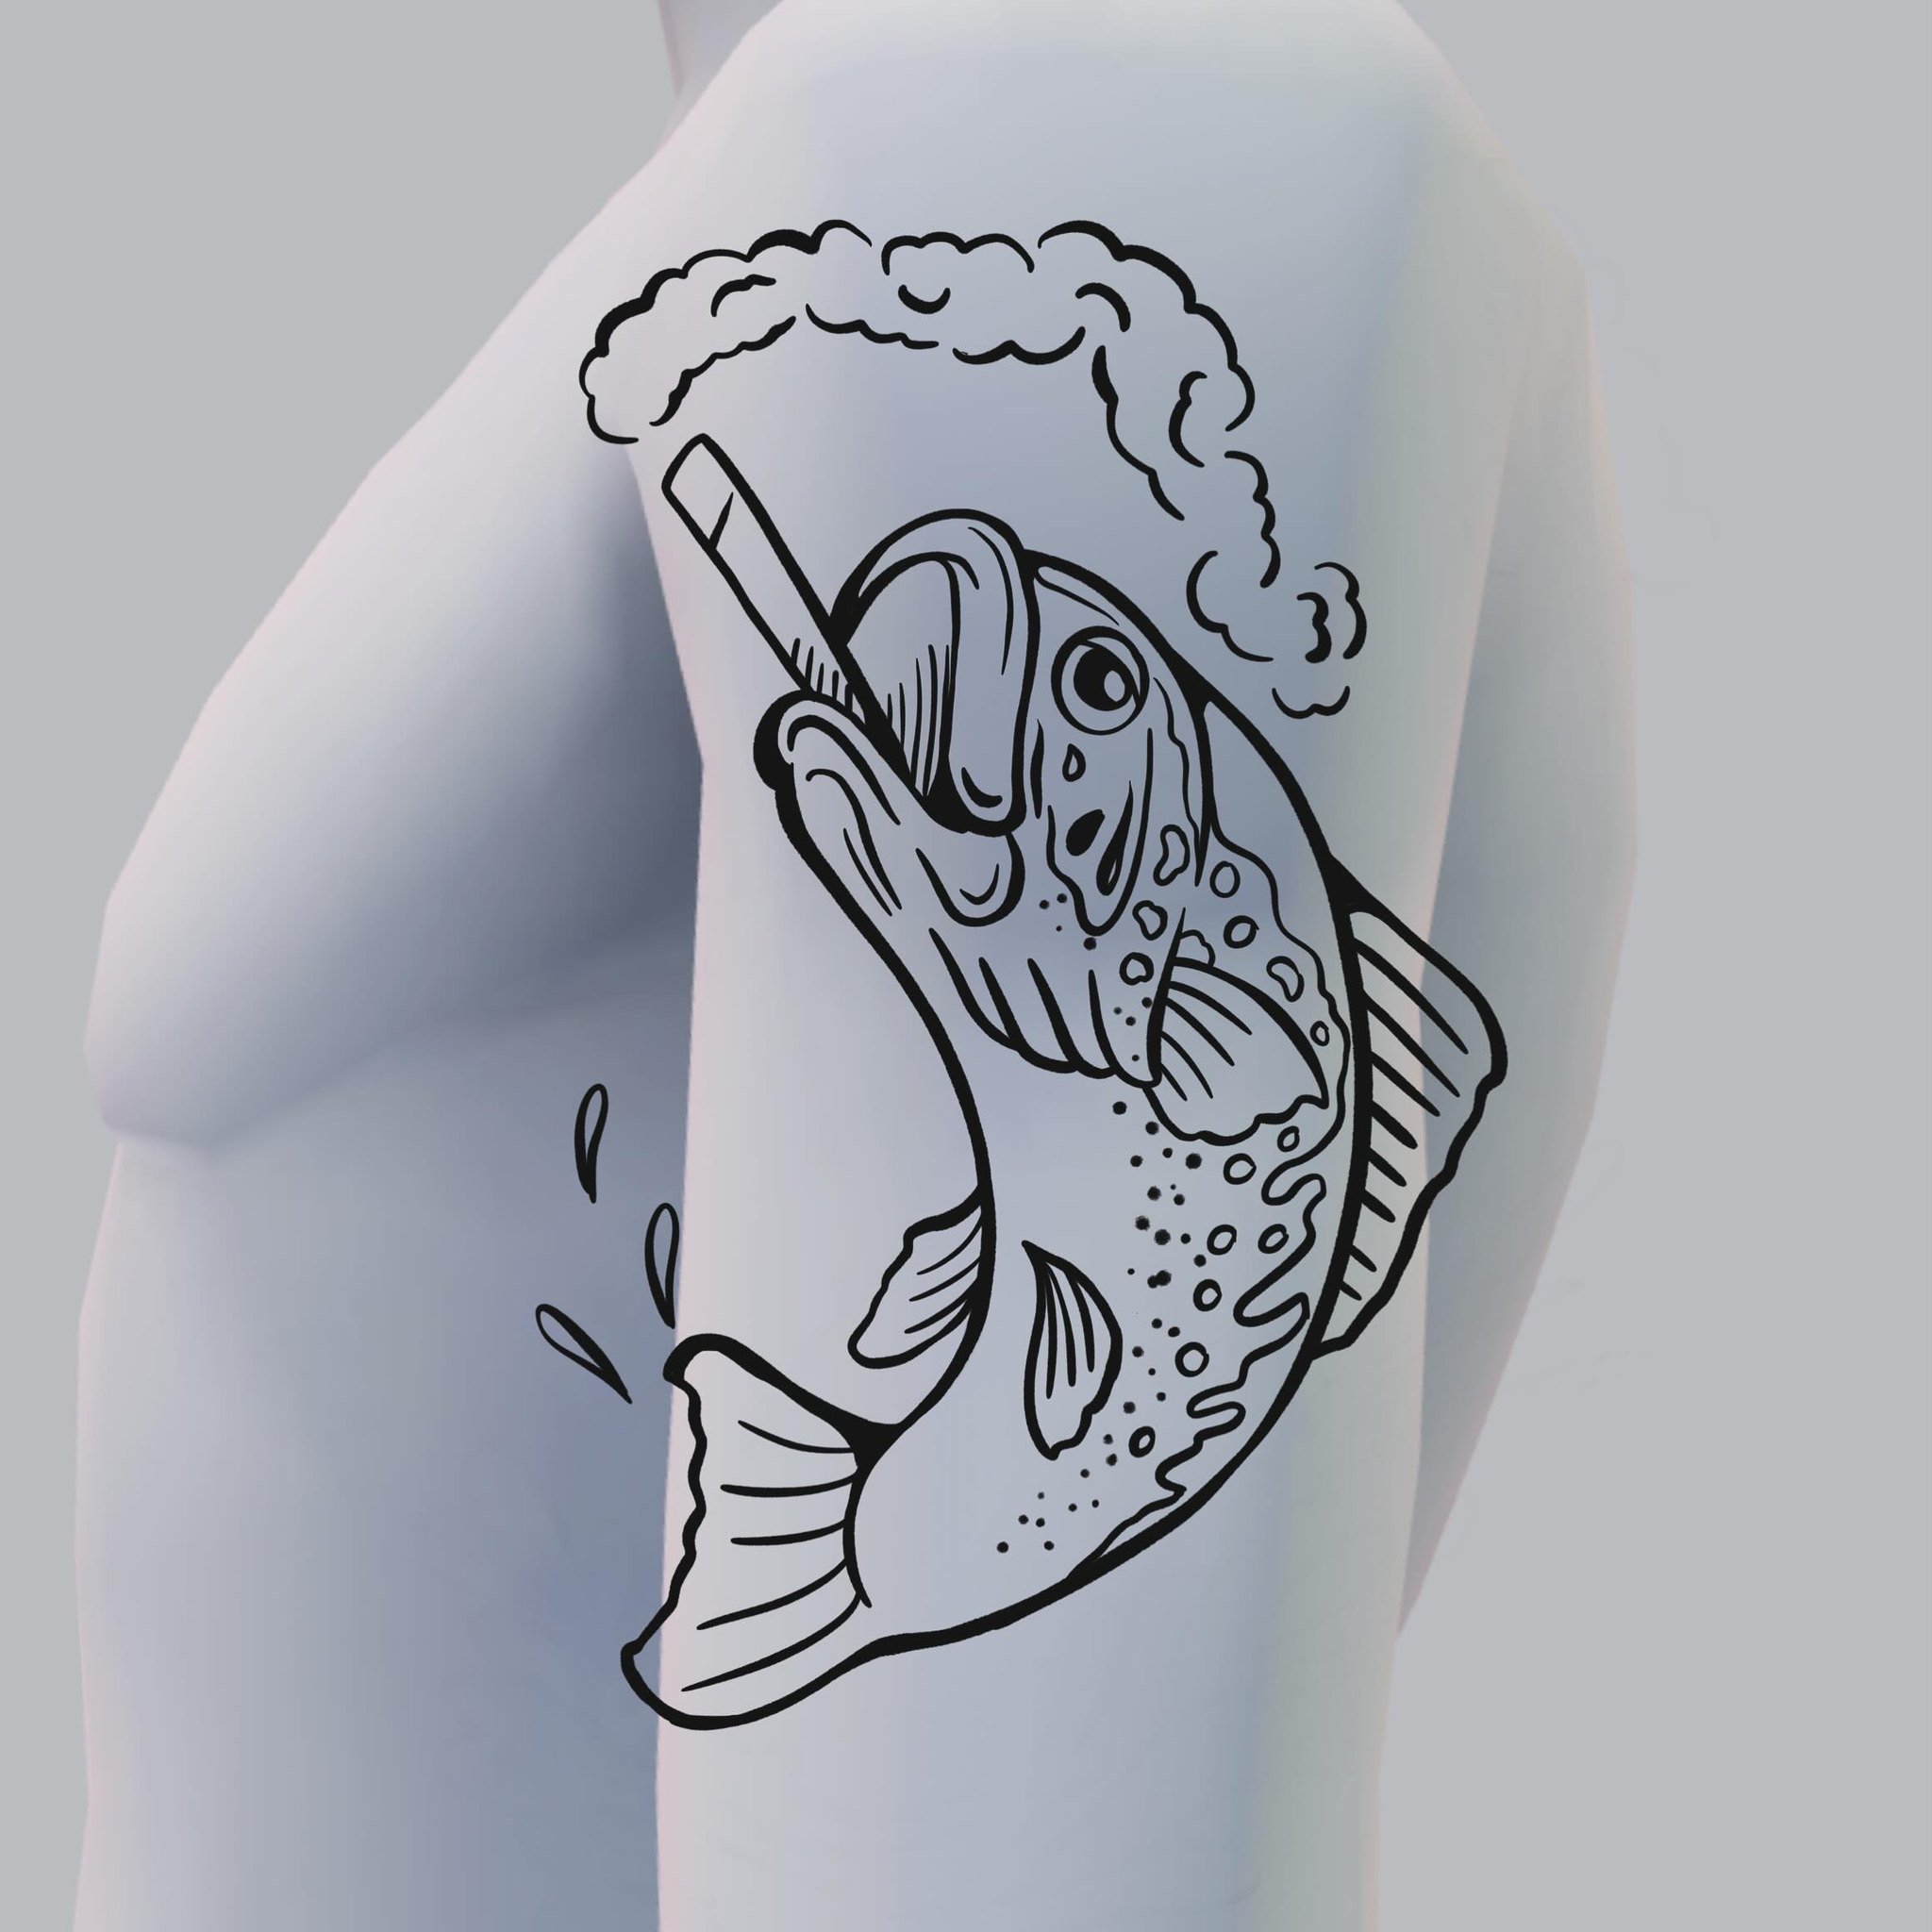 Bass Design Available 🚬 🐟
Black and Grey and Color Available
DM or call the shop at 470-238-3859 to book or info!
.
.
.
.
.
.
#bassfish #fishing #fishtattoo #fishinglife #tattooartist #atlantatattooartist #georgiatattoo #georgiatattooartist